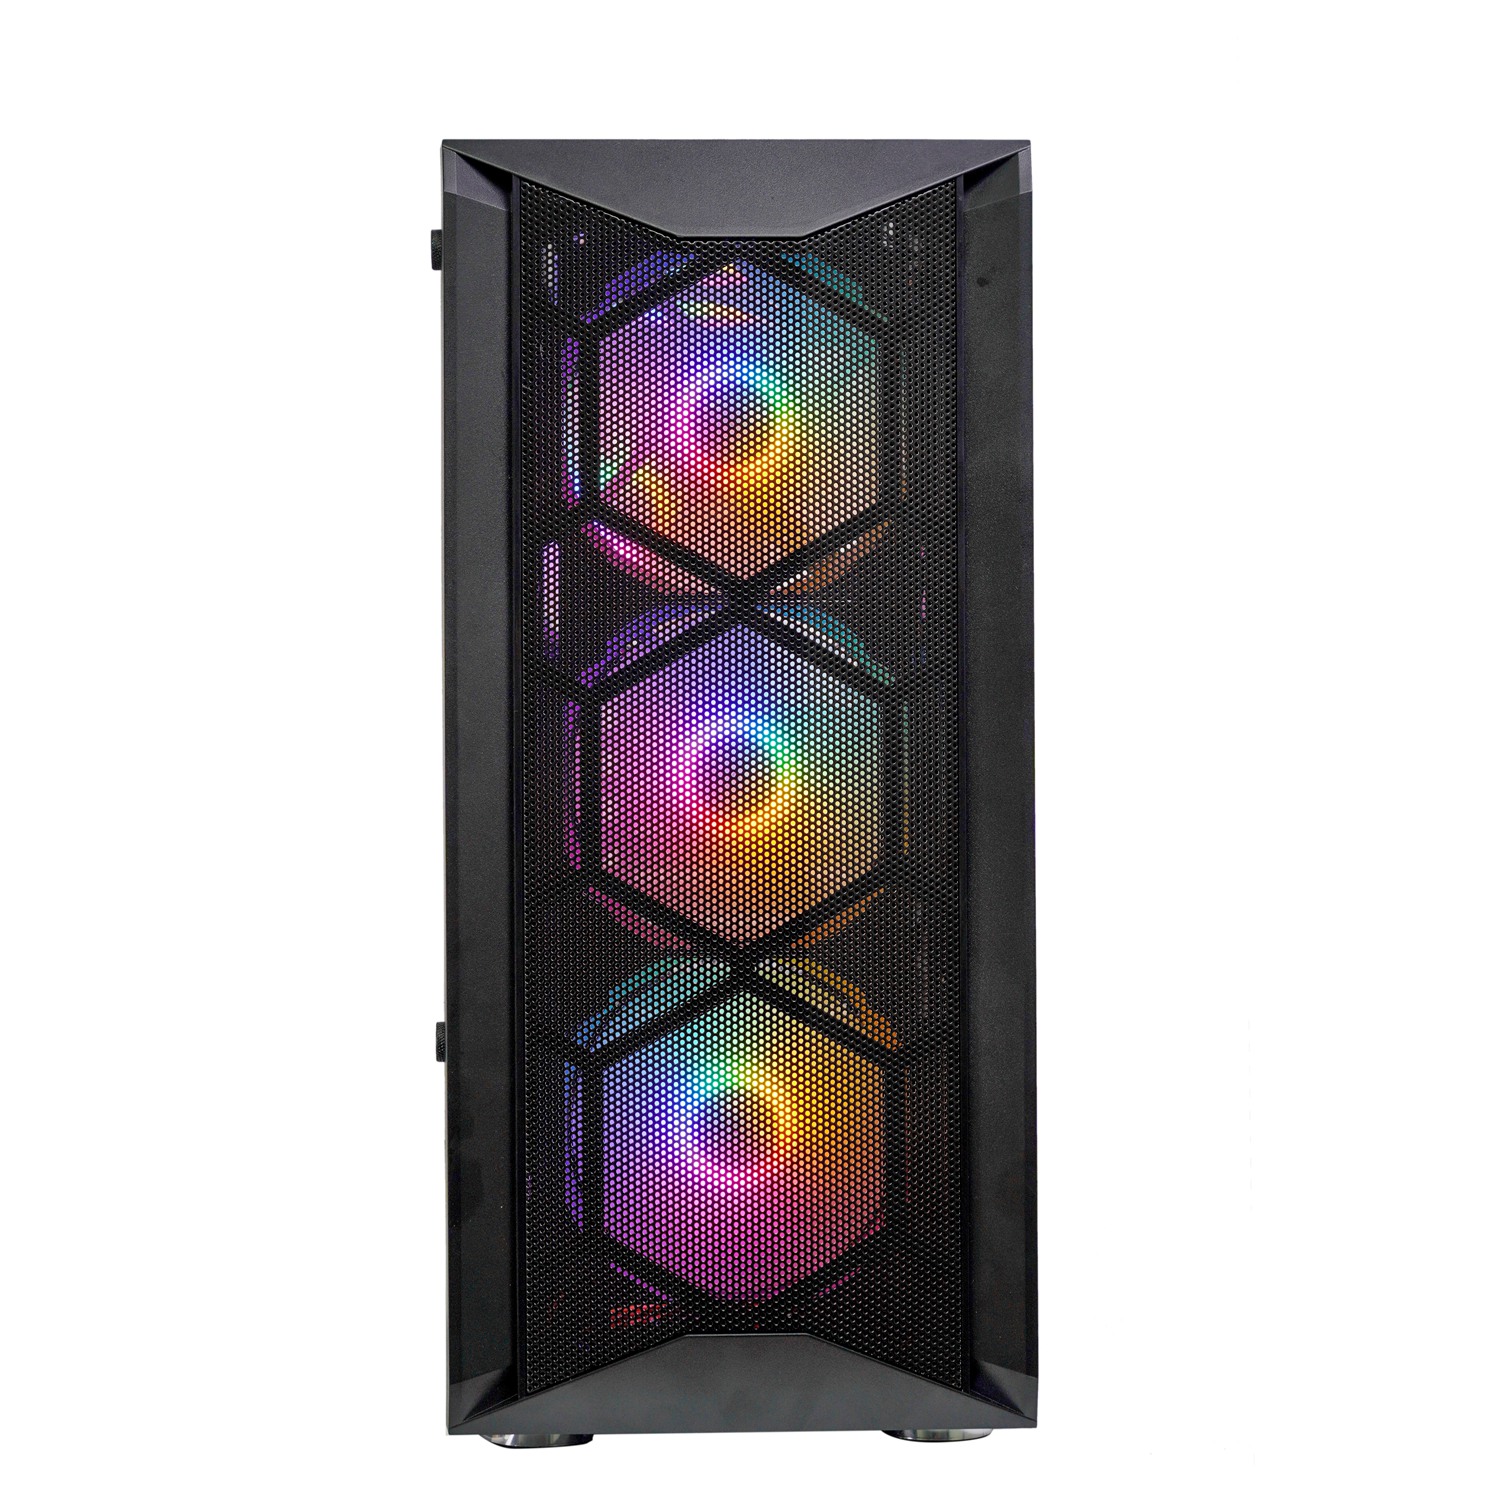 New iron mesh panel Gaming Computer PC Case with RGB Cooling Fan